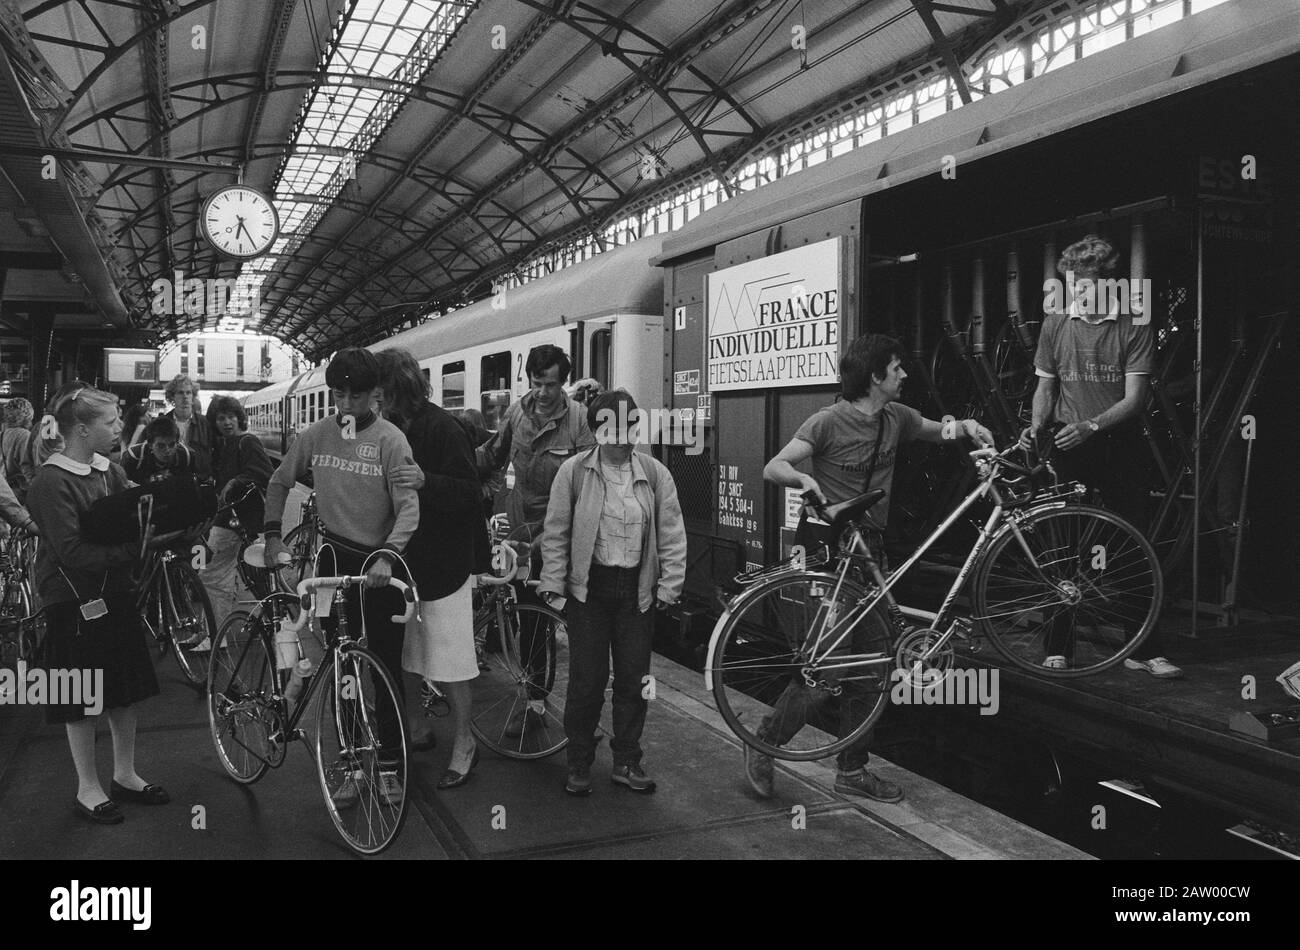 Minister Smit Kroes gives departure signal for first bike sleeper train to France; loading the bikes in the special cars with bike racks / Date: July 1, 1985 Location: France Keywords: BICYCLES, ministers, trains, wagons Person Name: Smit-Kroes, Neelie Stock Photo